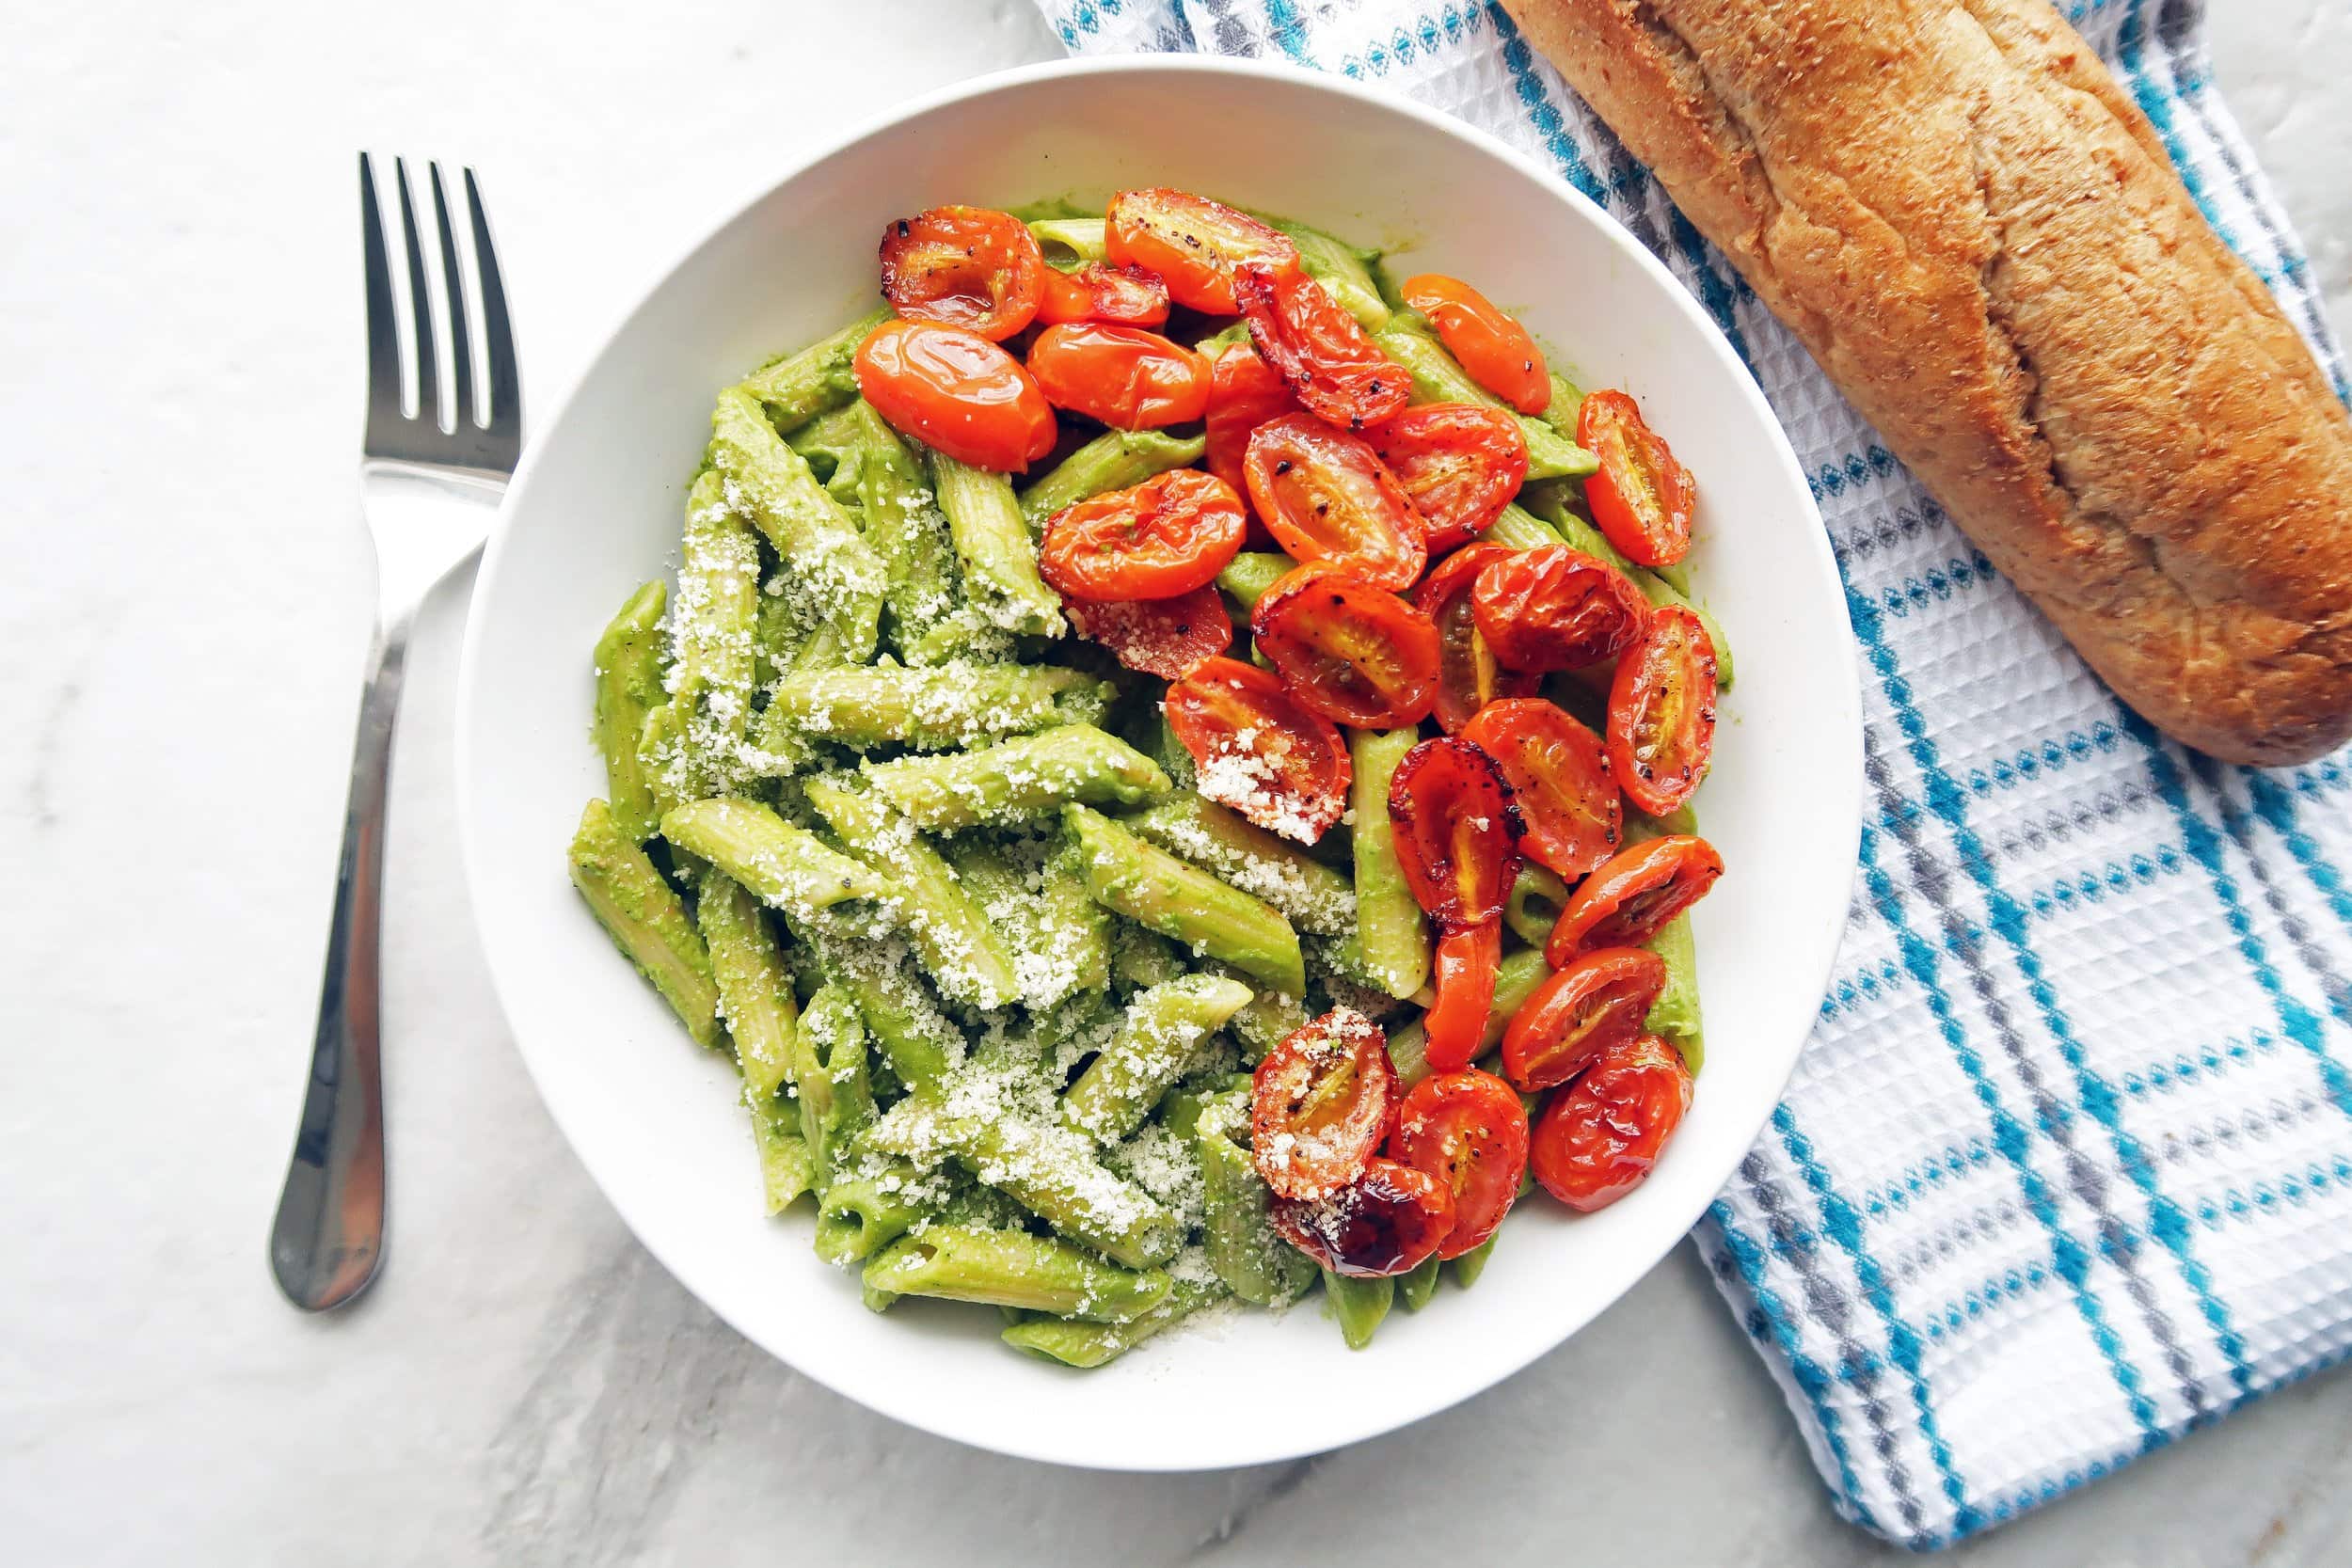 Pesto pasta with roasted tomatoes in a white bowl; a fork, kitchen towel, and french bread to its side.